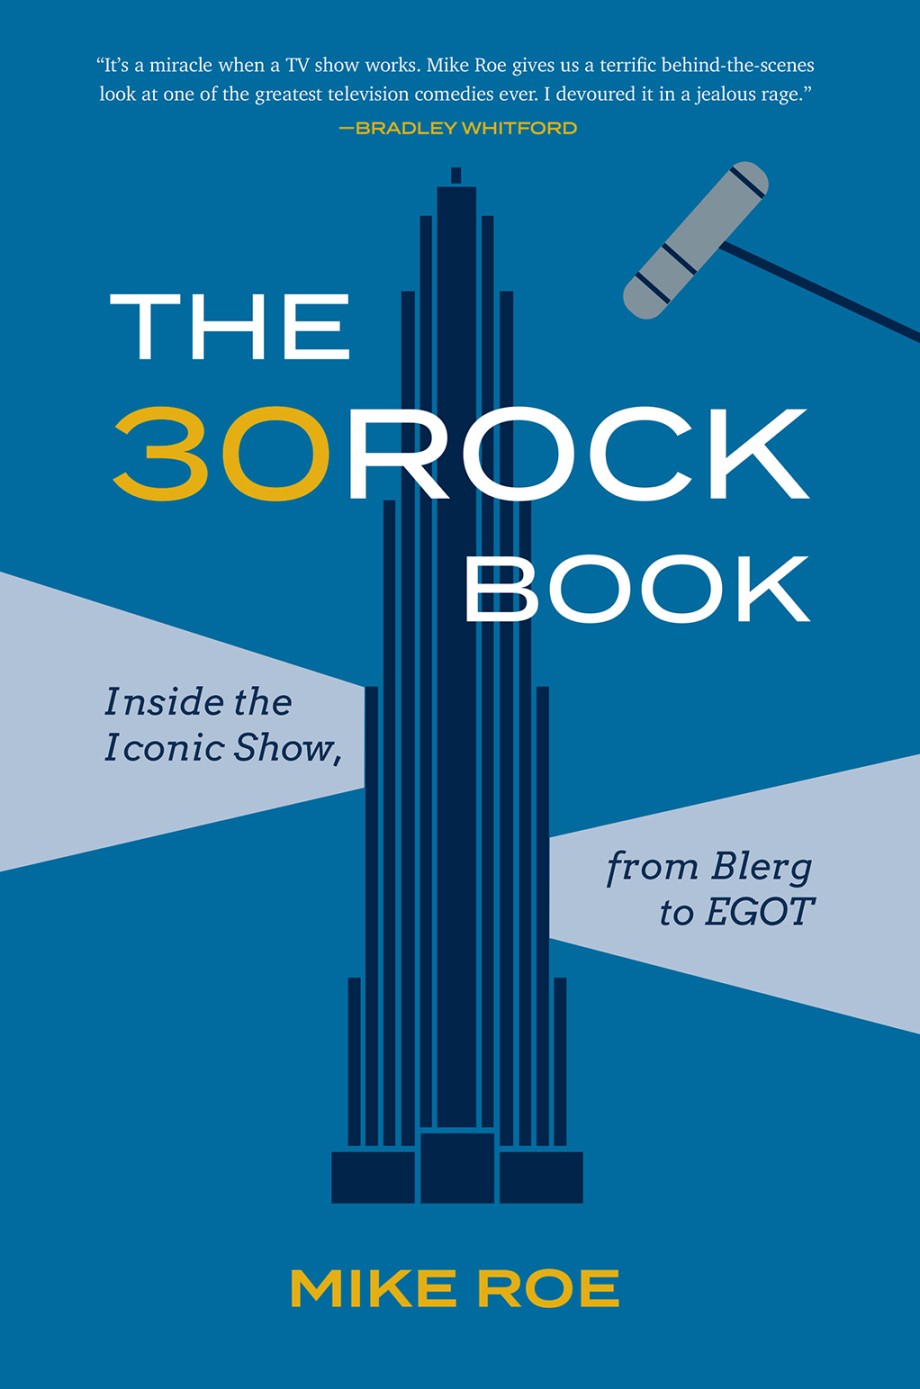 30 Rock Book Inside the Iconic Show, from Blerg to EGOT